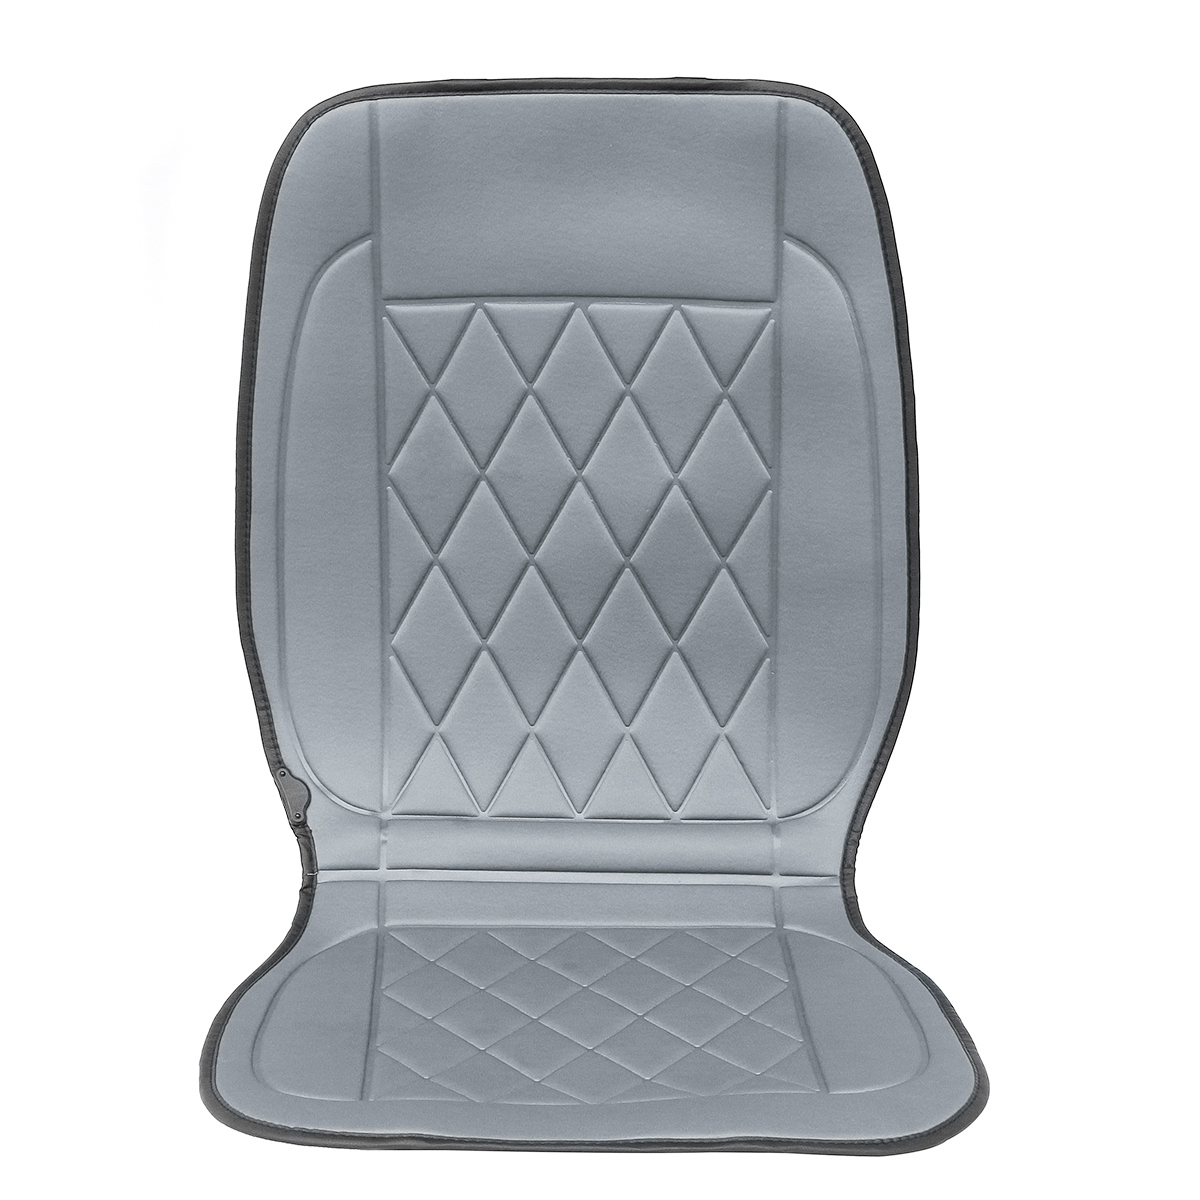 12V-Car-Front-Seat-Heated-Cushion-Winter-Warmer-Cover-Heating-Mat-Universal-1404765